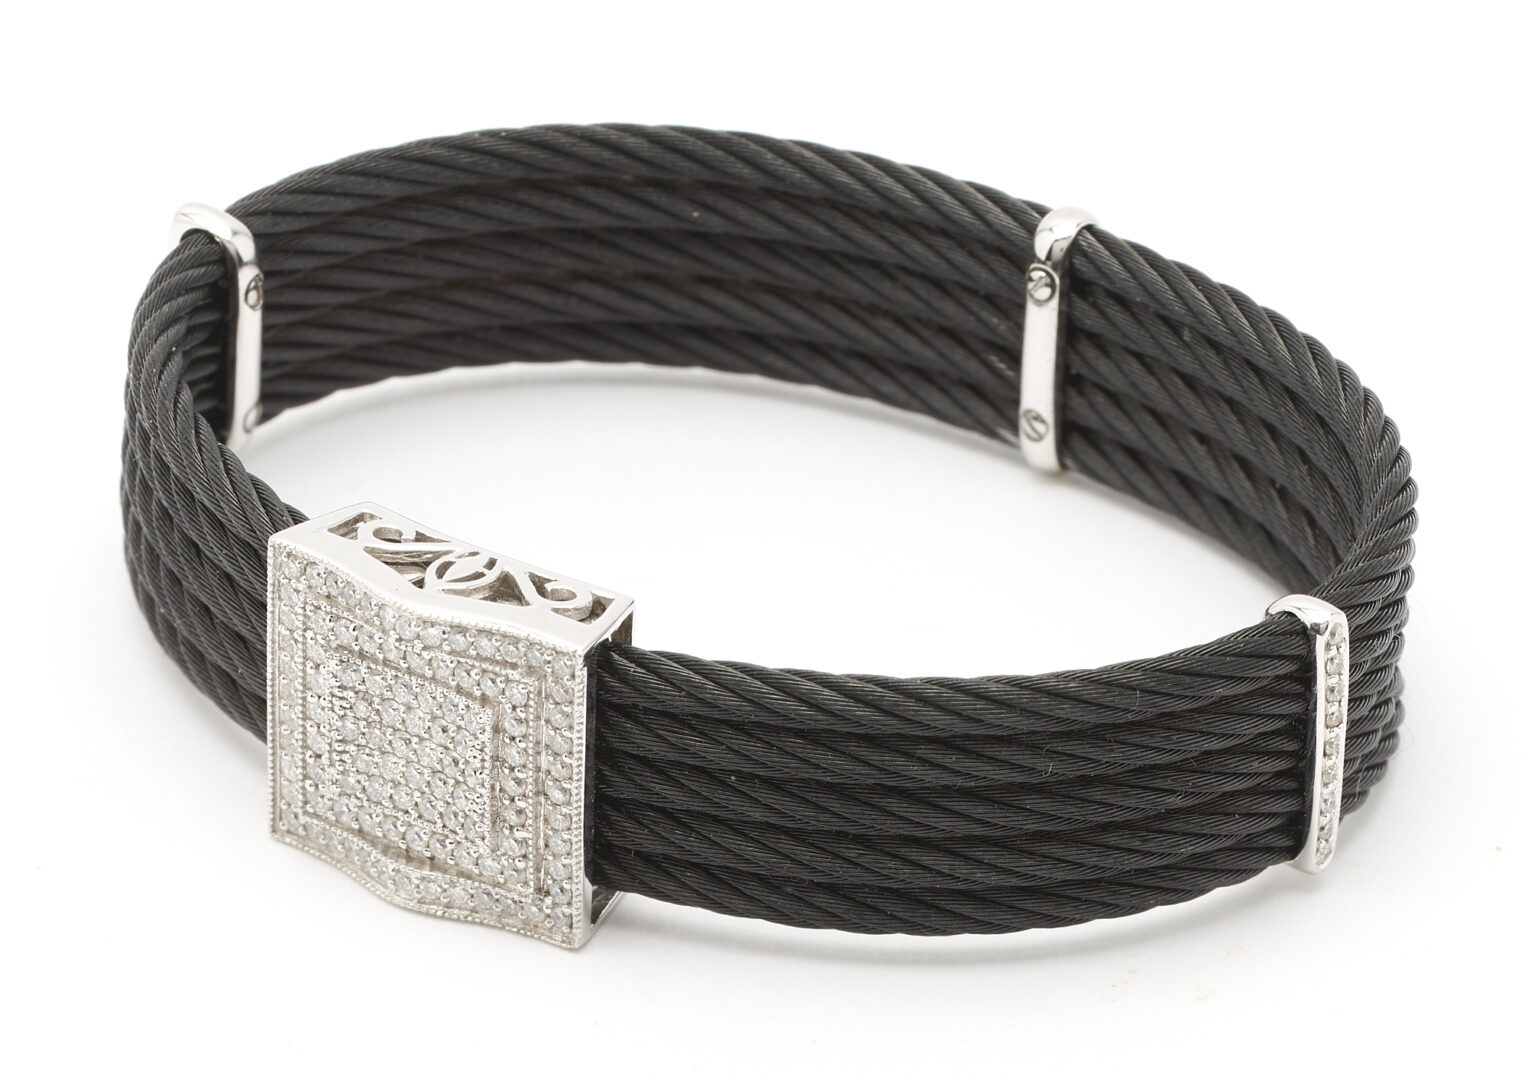 Lot 268: 18K, Diamond, & Black Cable Necklace, Bracelet, and Earrings by Charriol